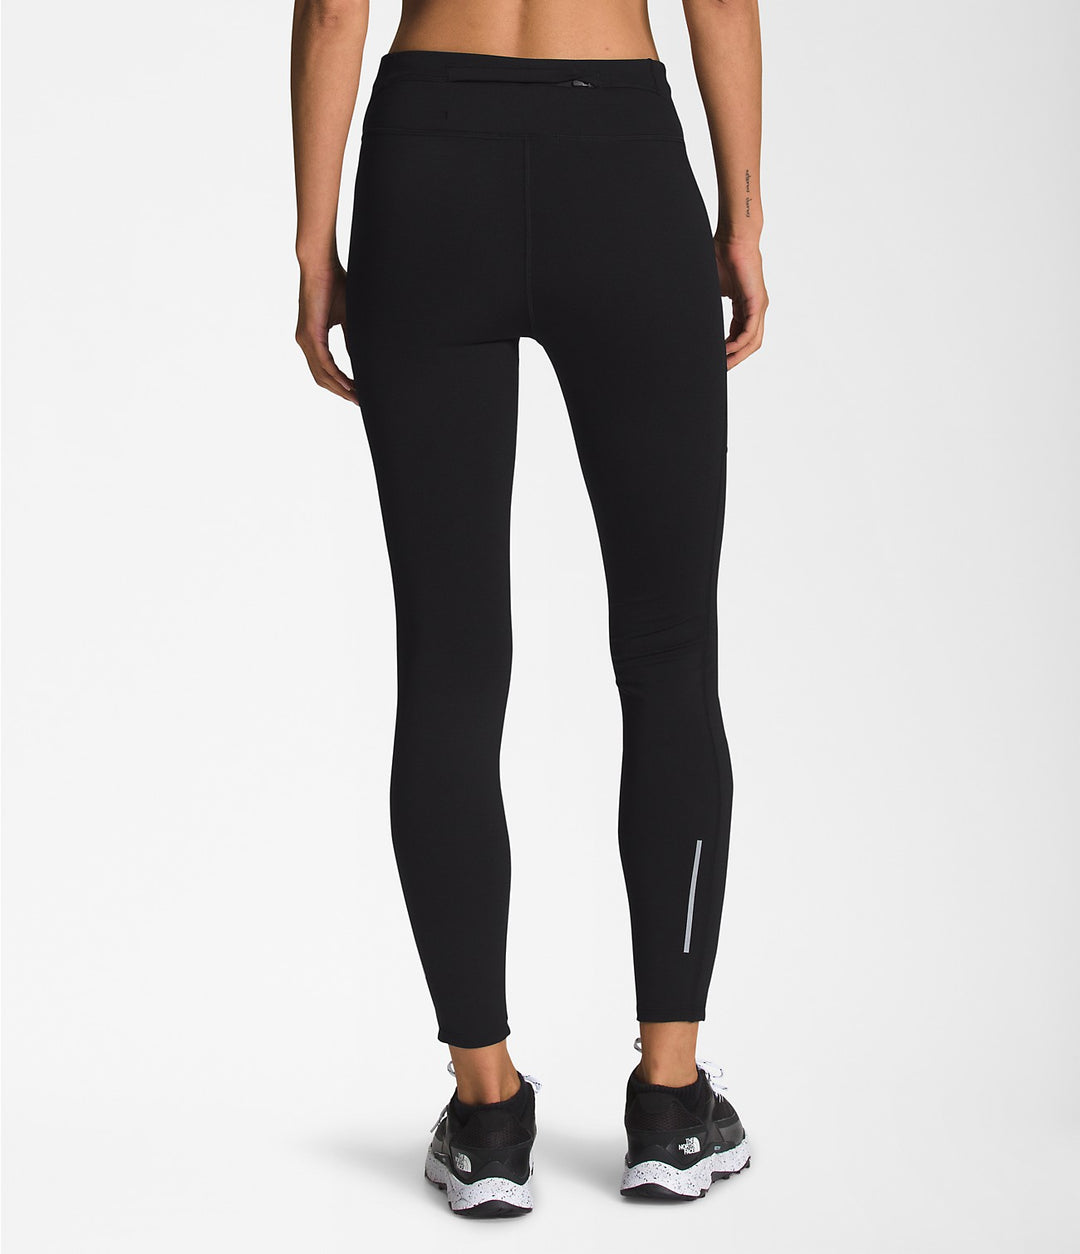 North Face Women's Winter Warm Tights – The Trail Shop